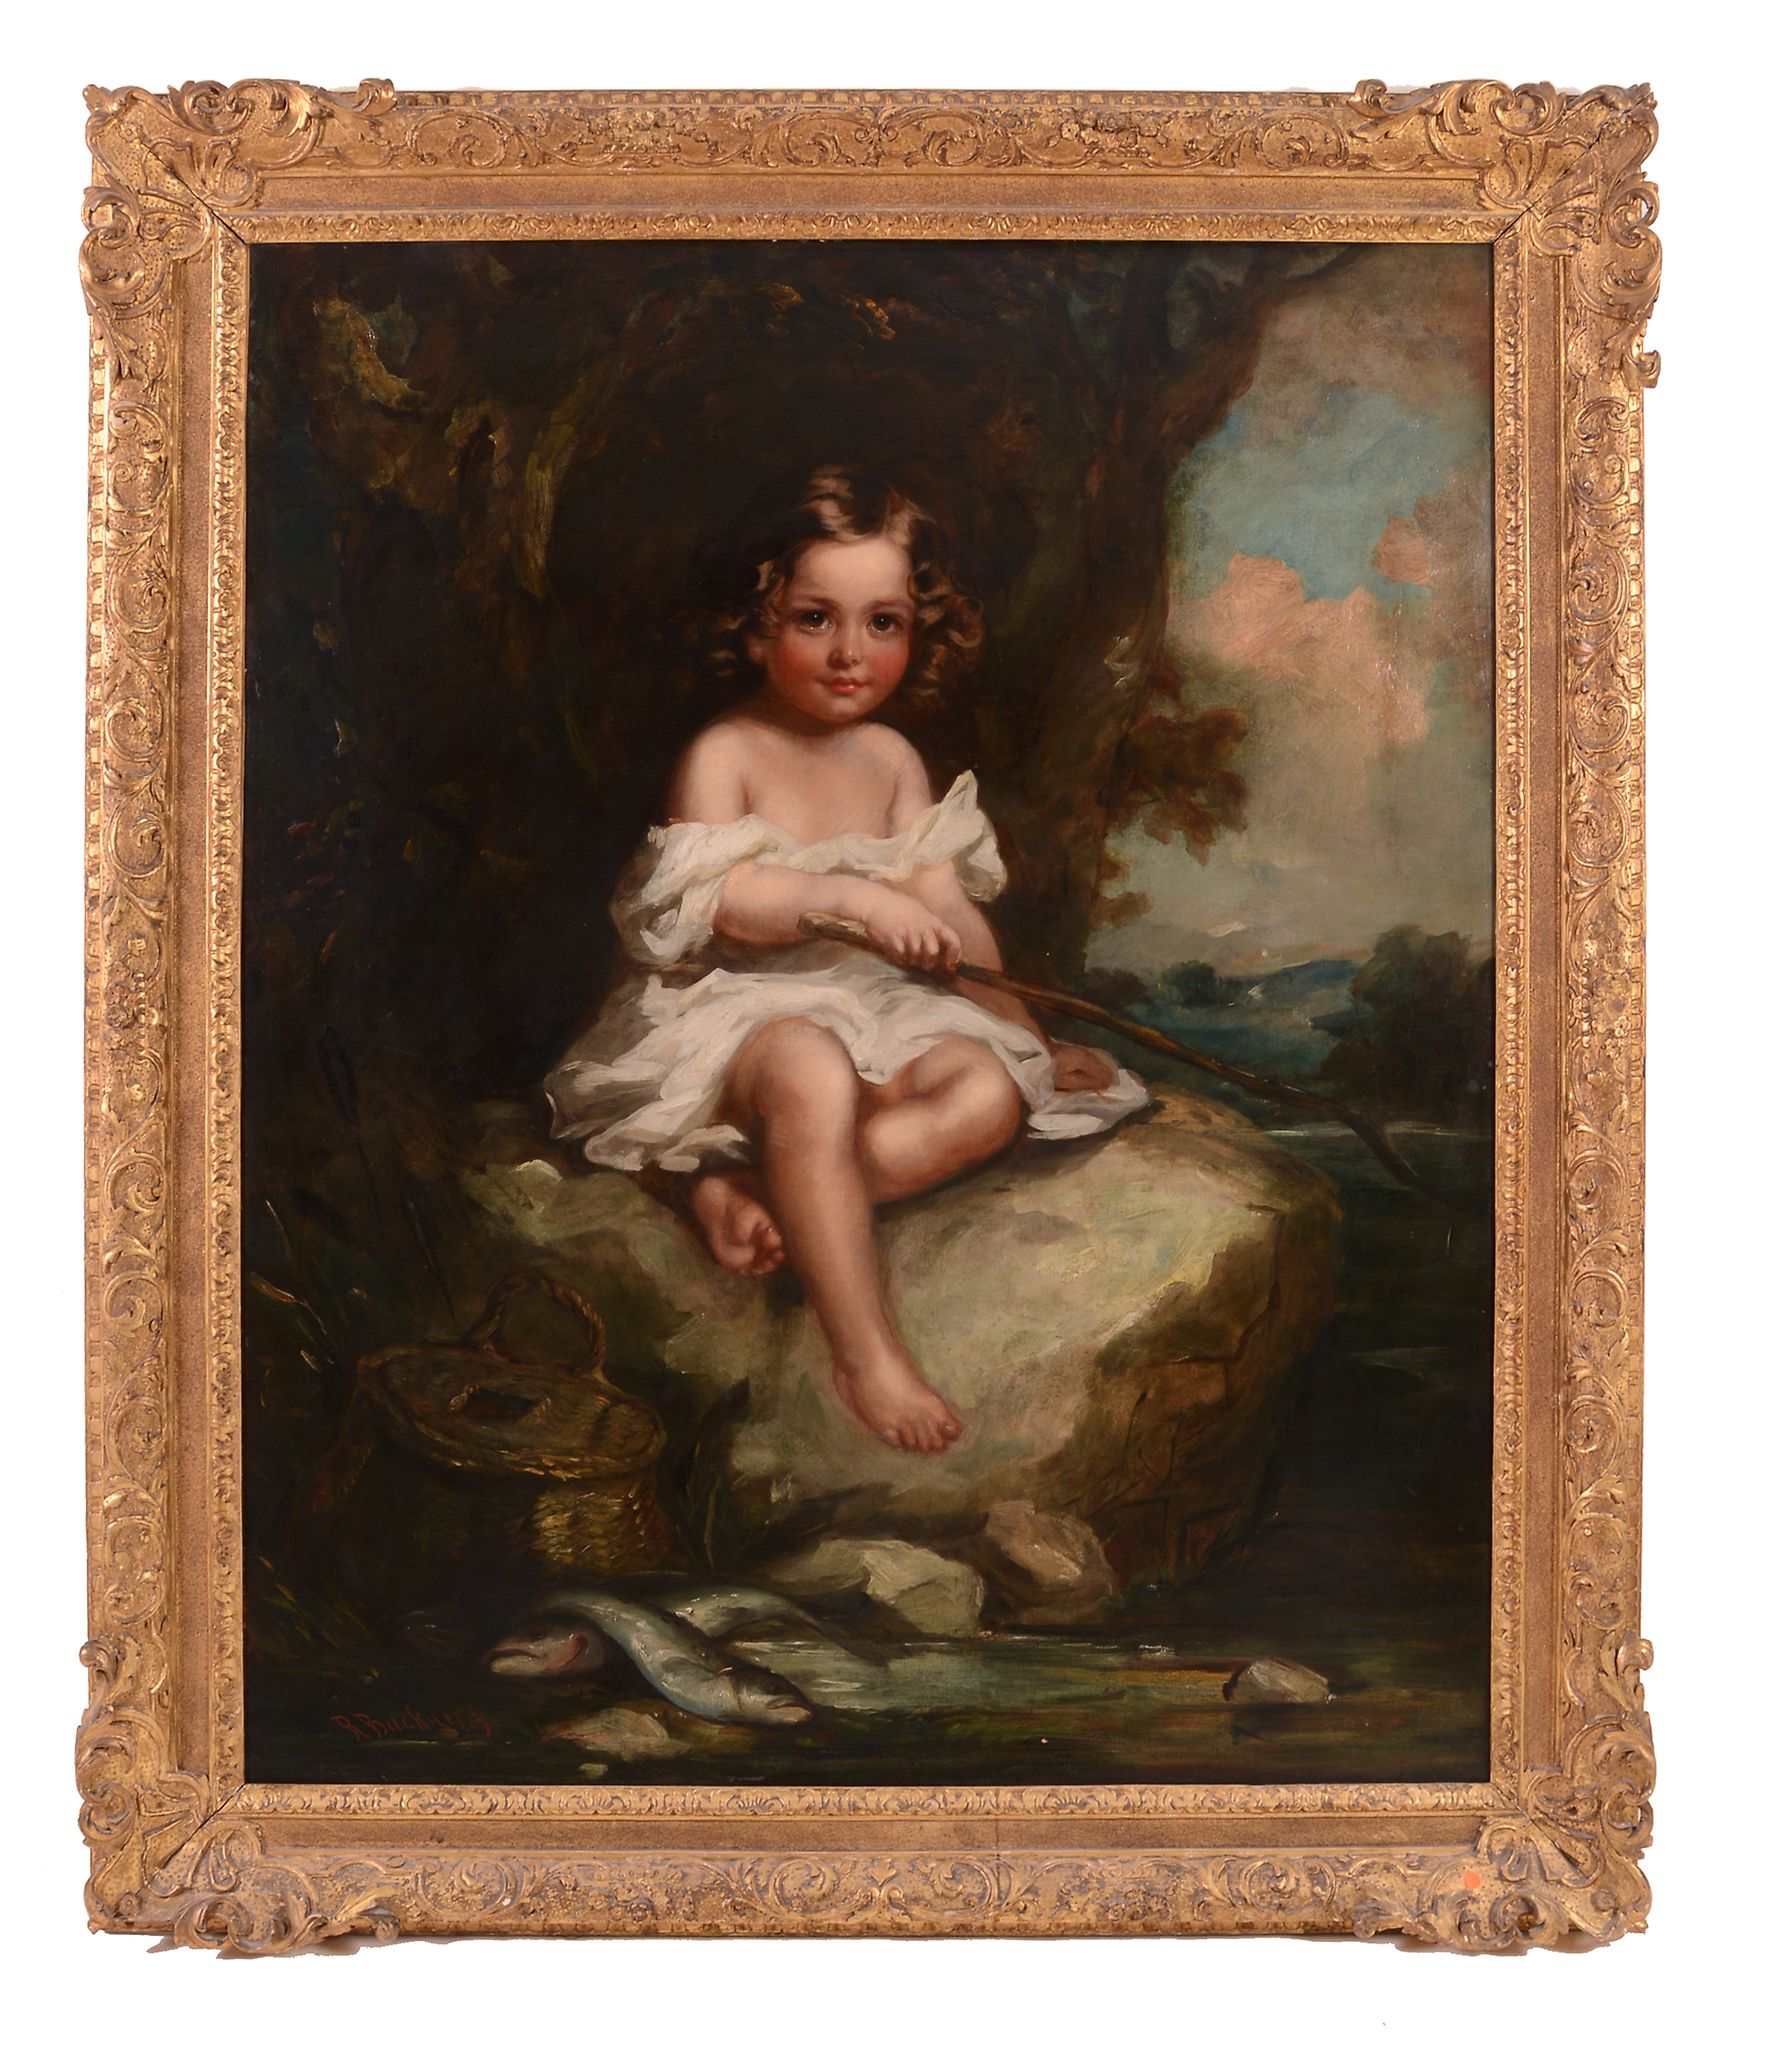 Richard Buckner (1812-1893) - Portrait of a young boy sitting on a rock fishing, with his catch by - Image 3 of 3